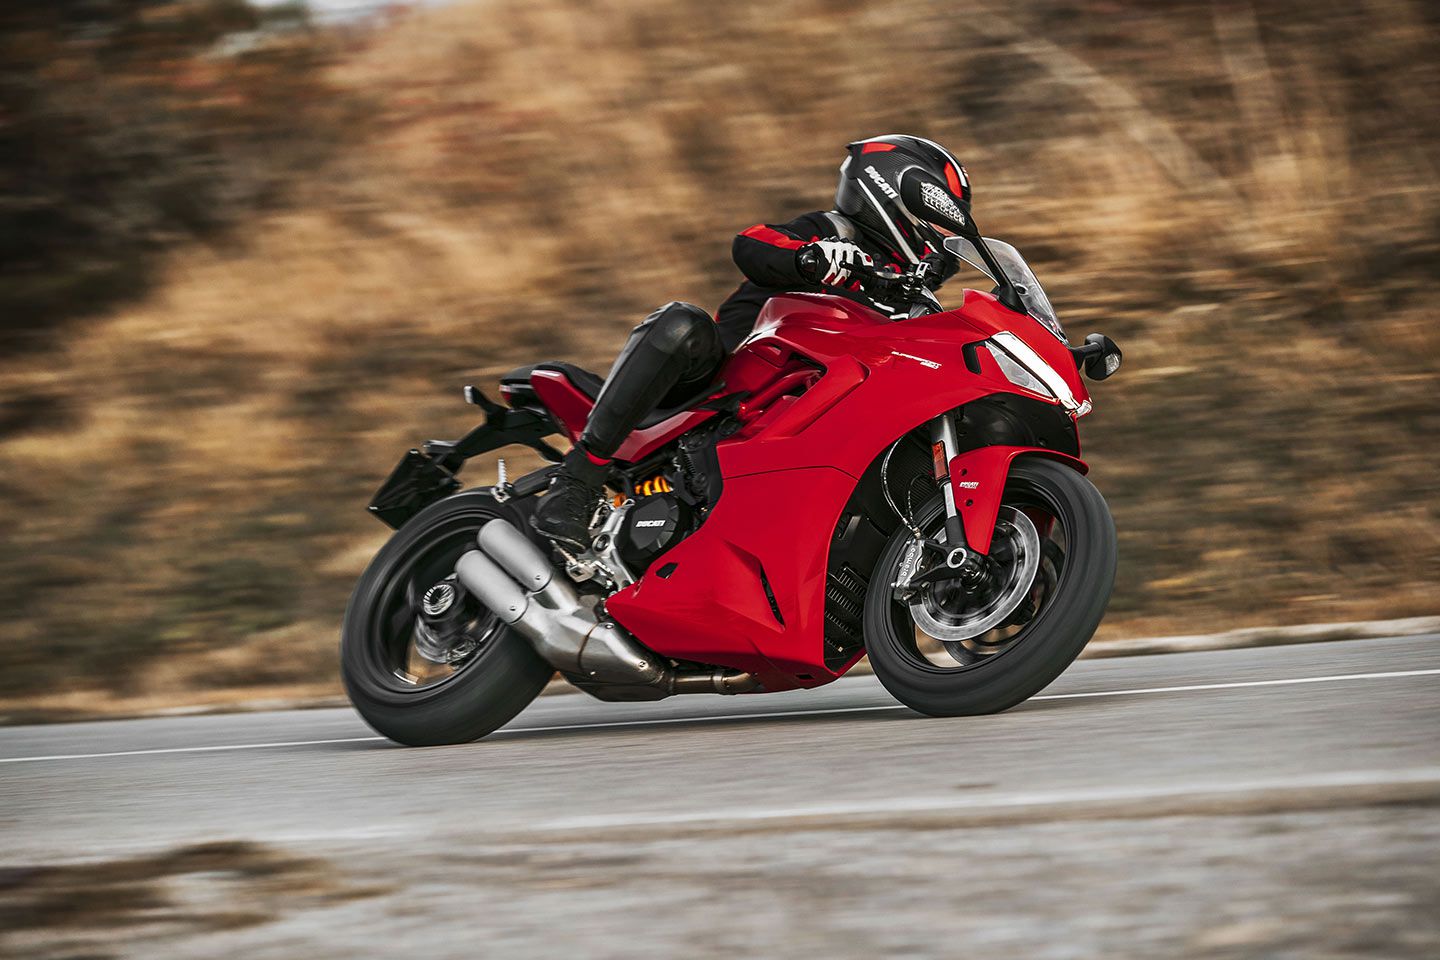 The SuperSport 950 is fun to cruise around town and tear through the canyons. Available accessories include panniers, heated grips, and a taller windscreen, which open the door to longer-distance touring.